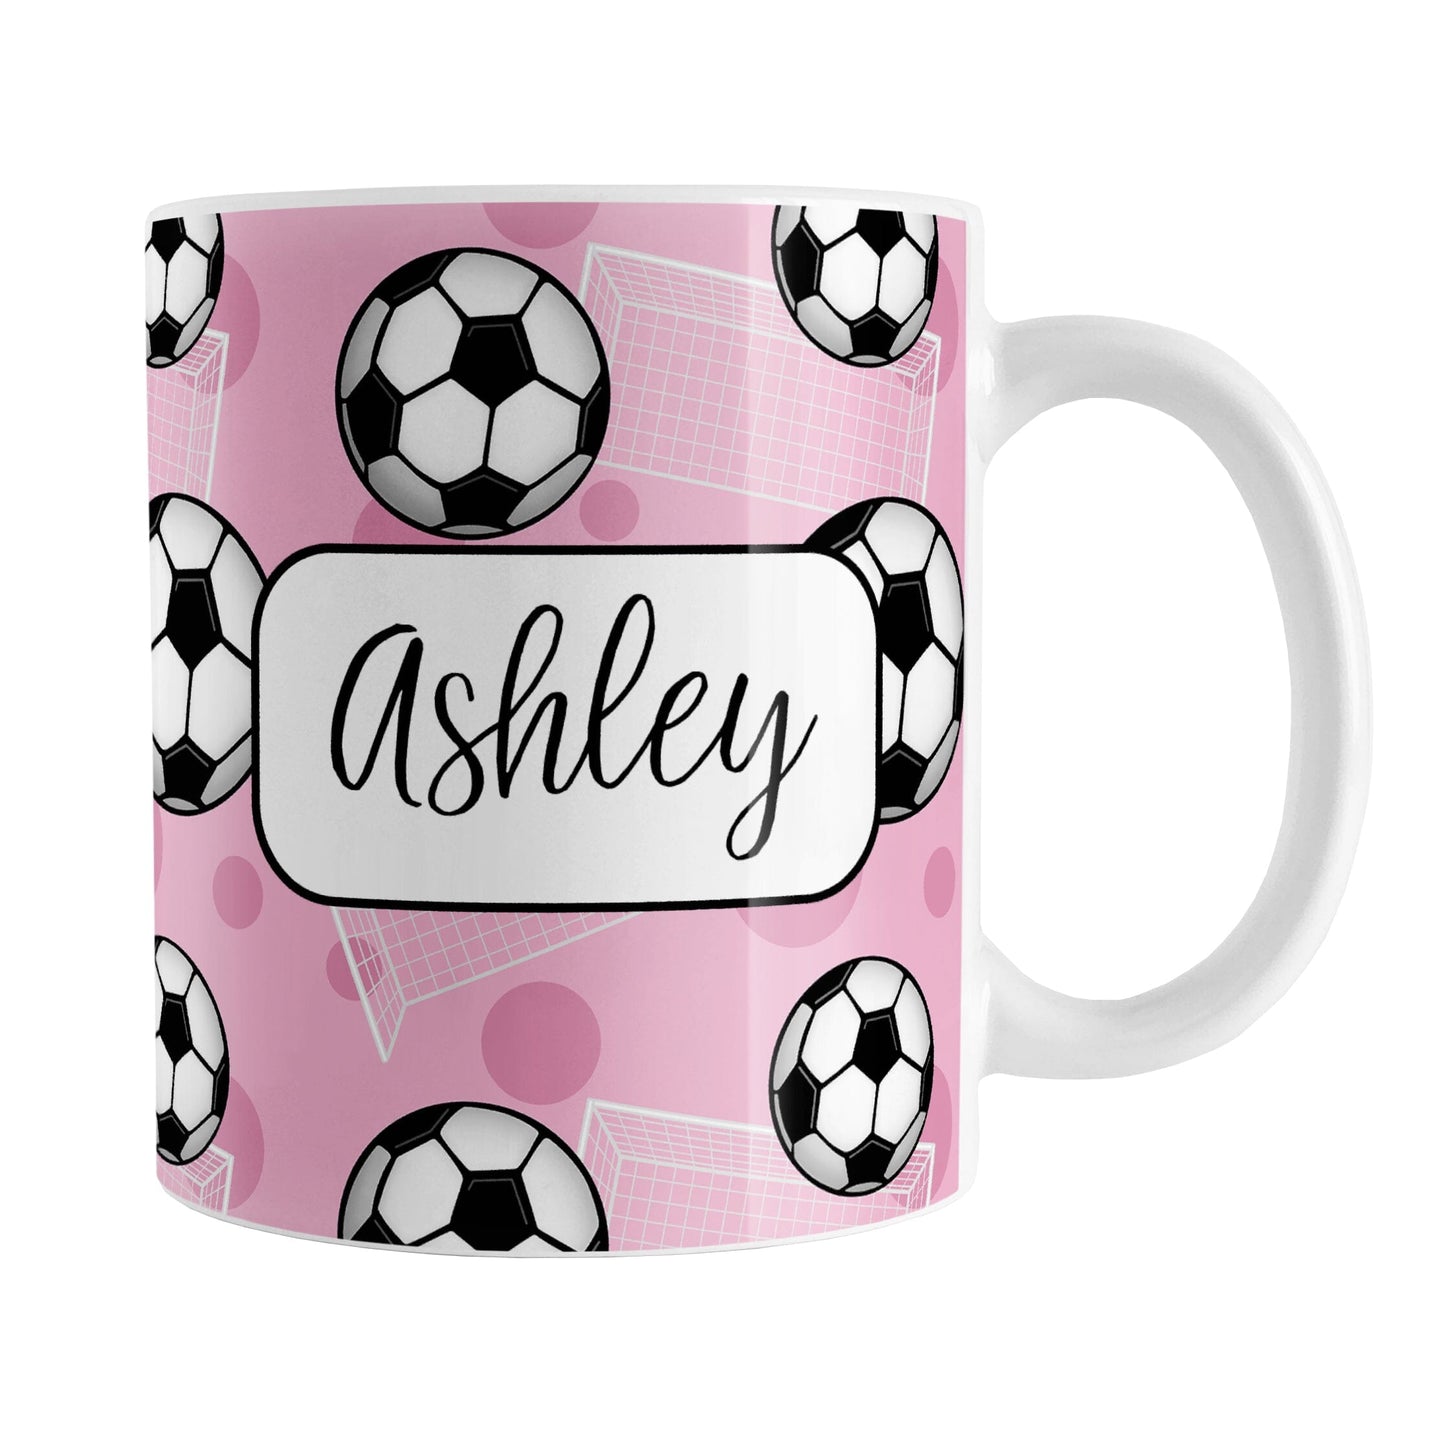 Soccer Ball and Goal Personalized Pink Soccer Mug (11oz) at Amy's Coffee Mugs. A ceramic coffee mug designed with a pattern of soccer balls and white soccer goals over a pink background with pink circles. Your personalized name is custom-printed in a fun black script font on both sides of the mug over the soccer pattern. 